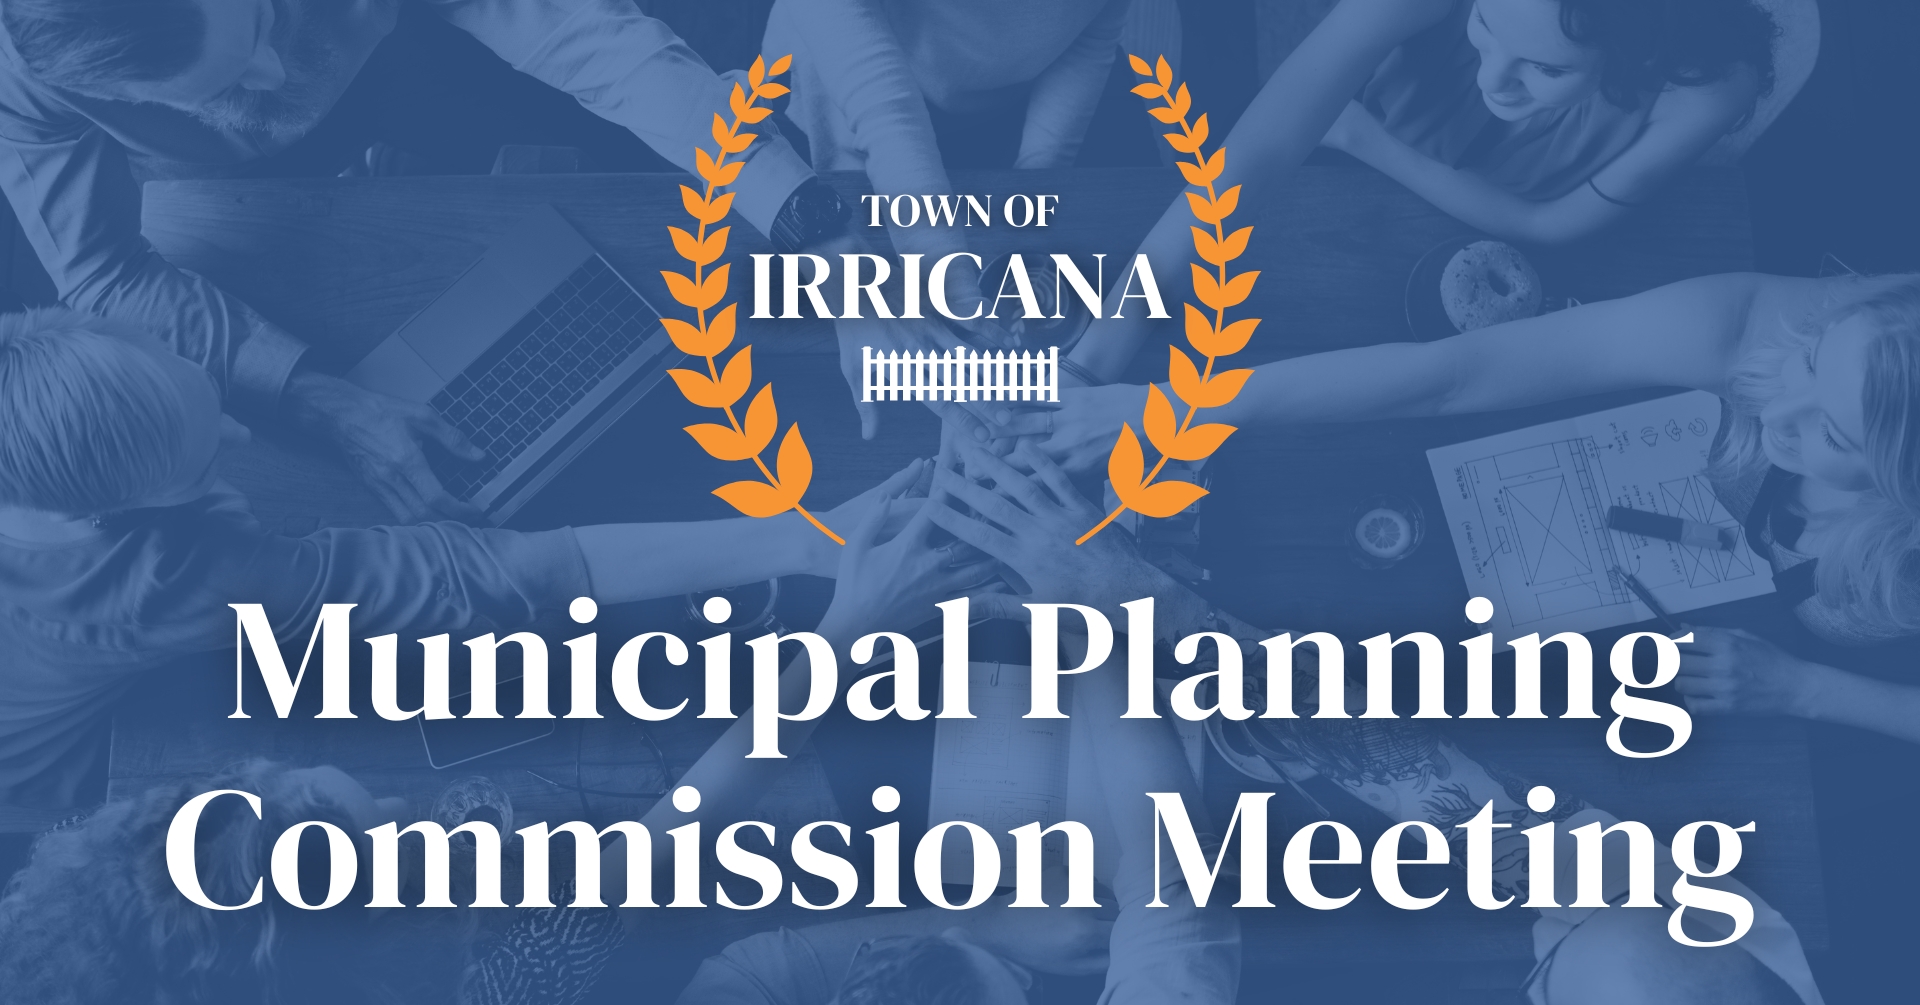 Town of Irricana Municipal Planning Commission Meeting